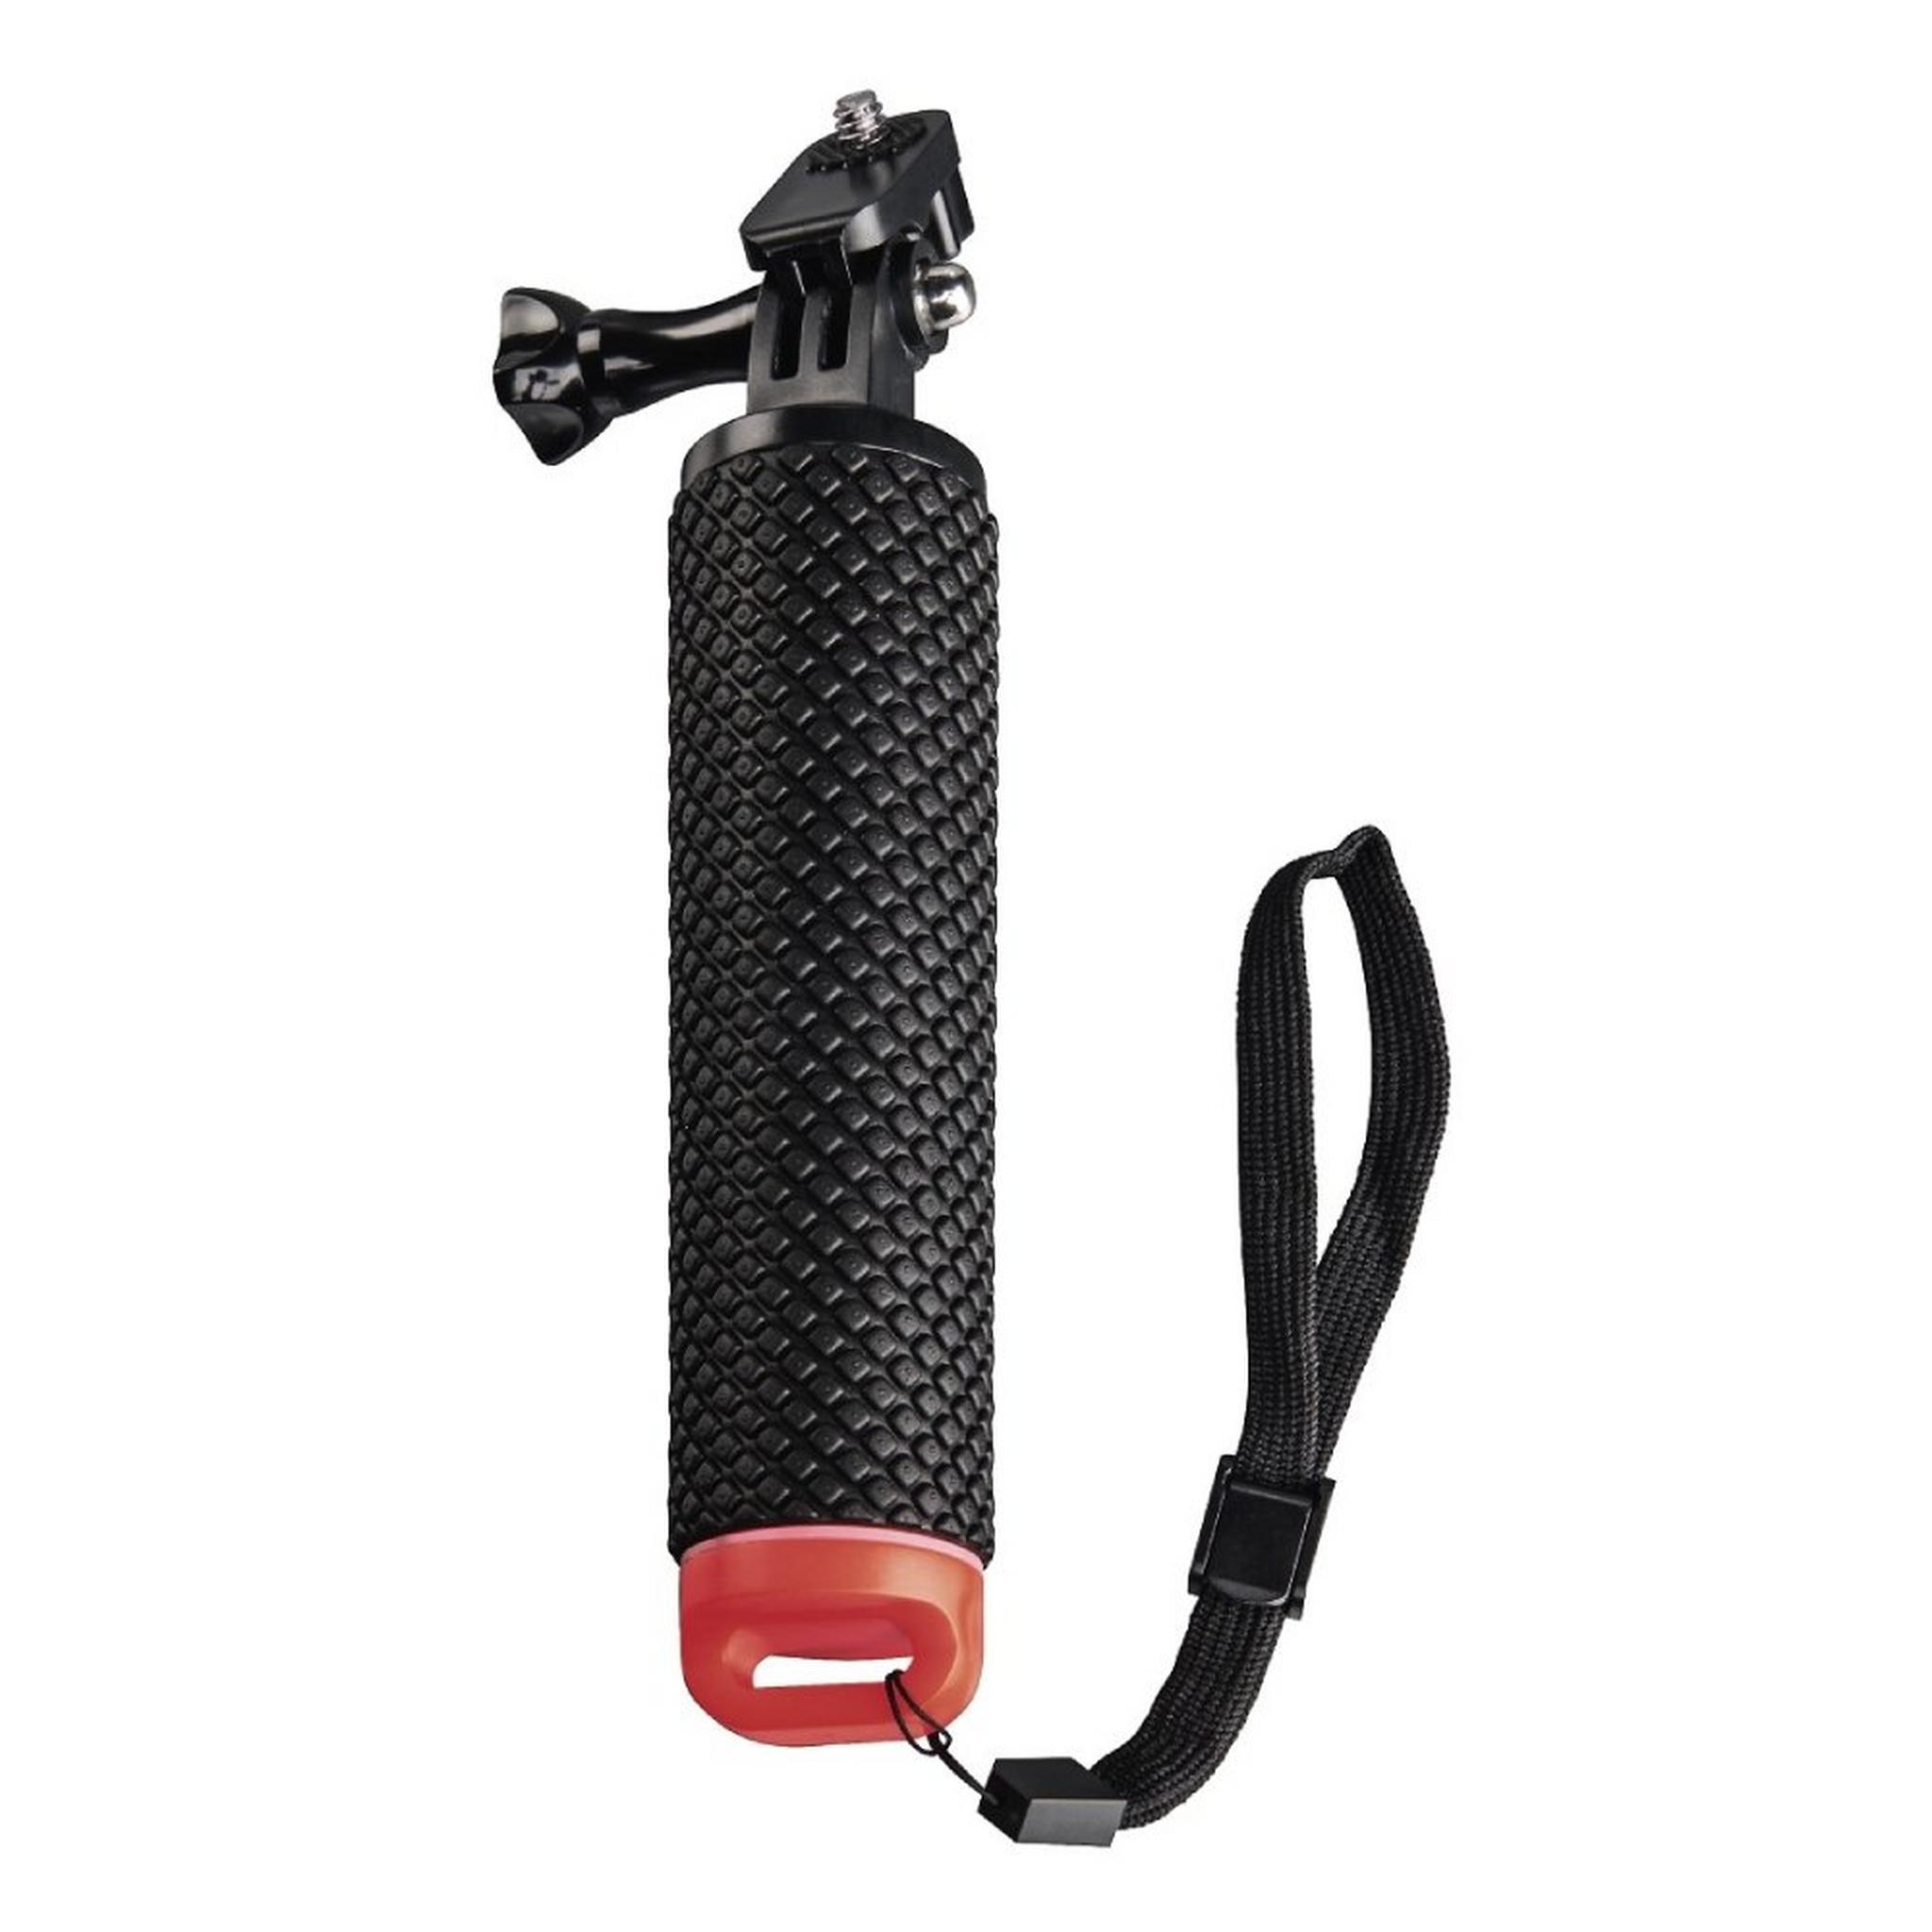 Hama 2 in 1 Floaty Action Camera Grip